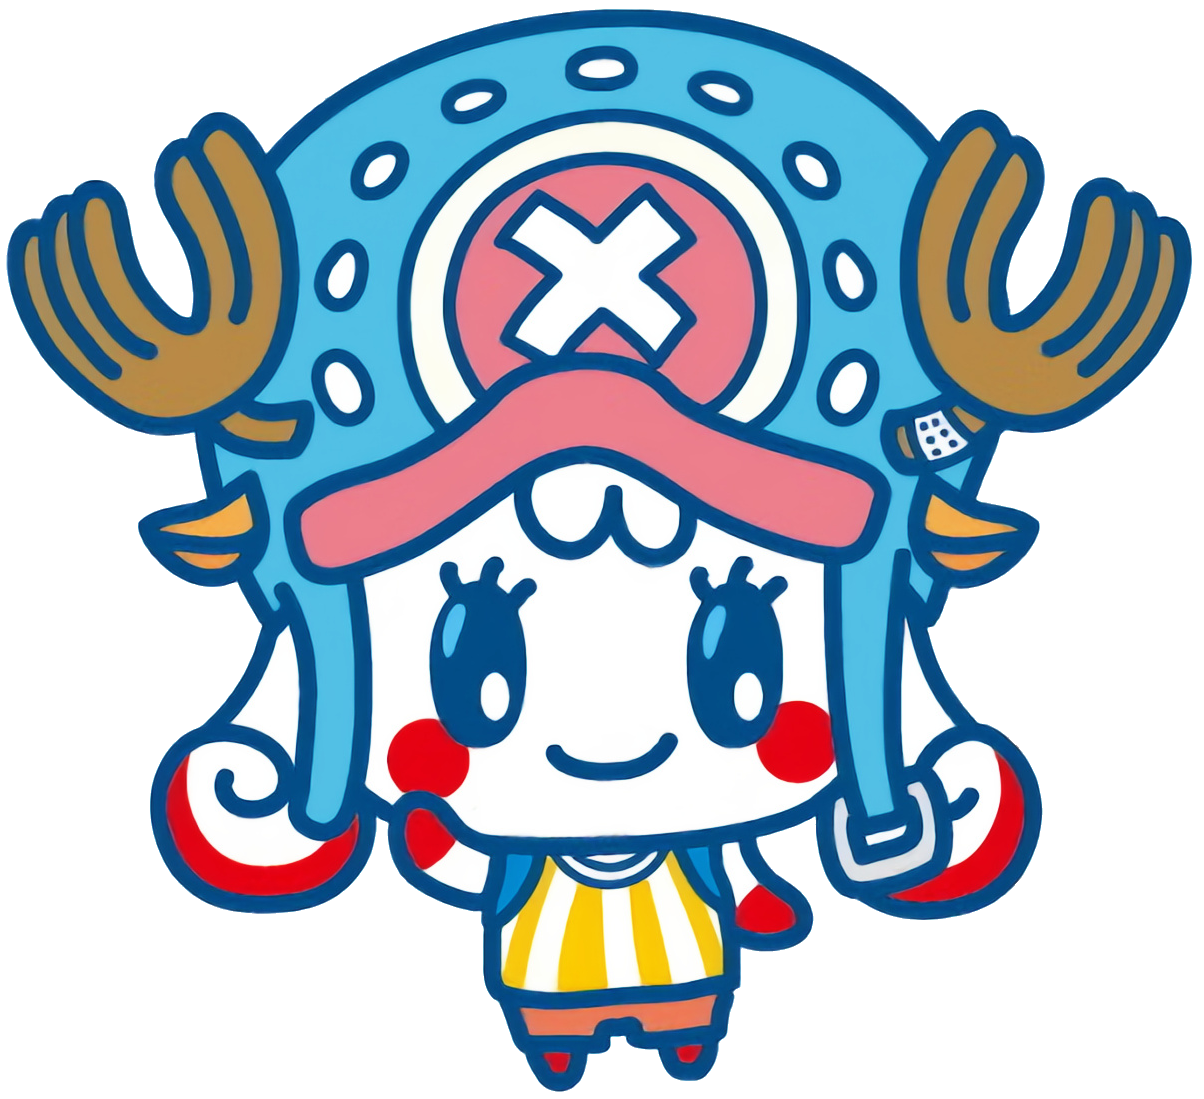 This is one of my favorite One Piece Tama characters!! Meet Chopper  Milktchi~ : r/tamagotchi